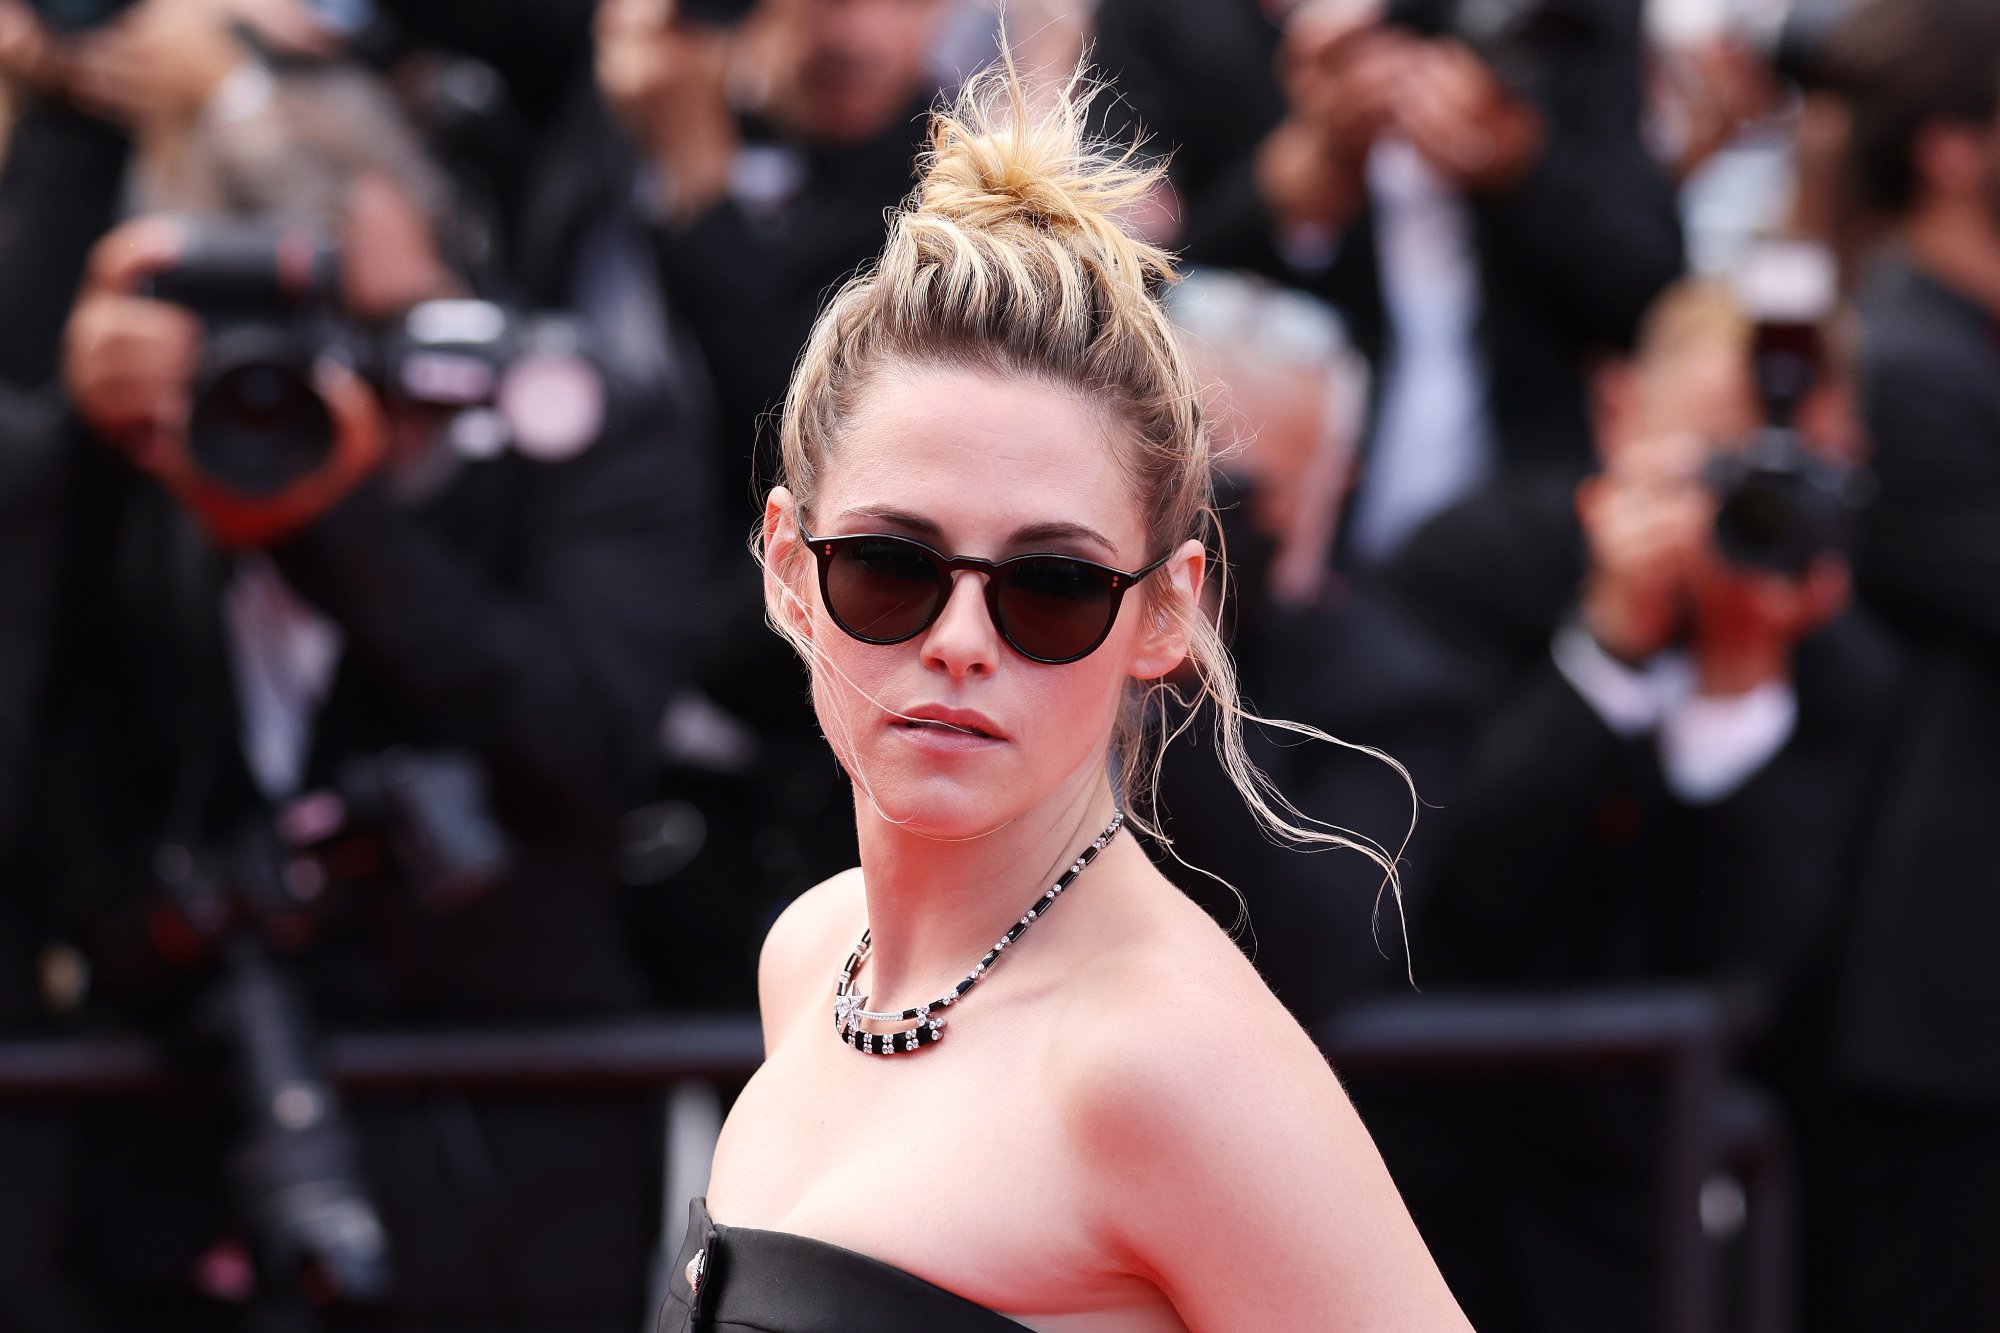 Kristen Stewart Compared ‘Crimes of the Future’ Premiere Reactions to Will Smith Oscars Slap